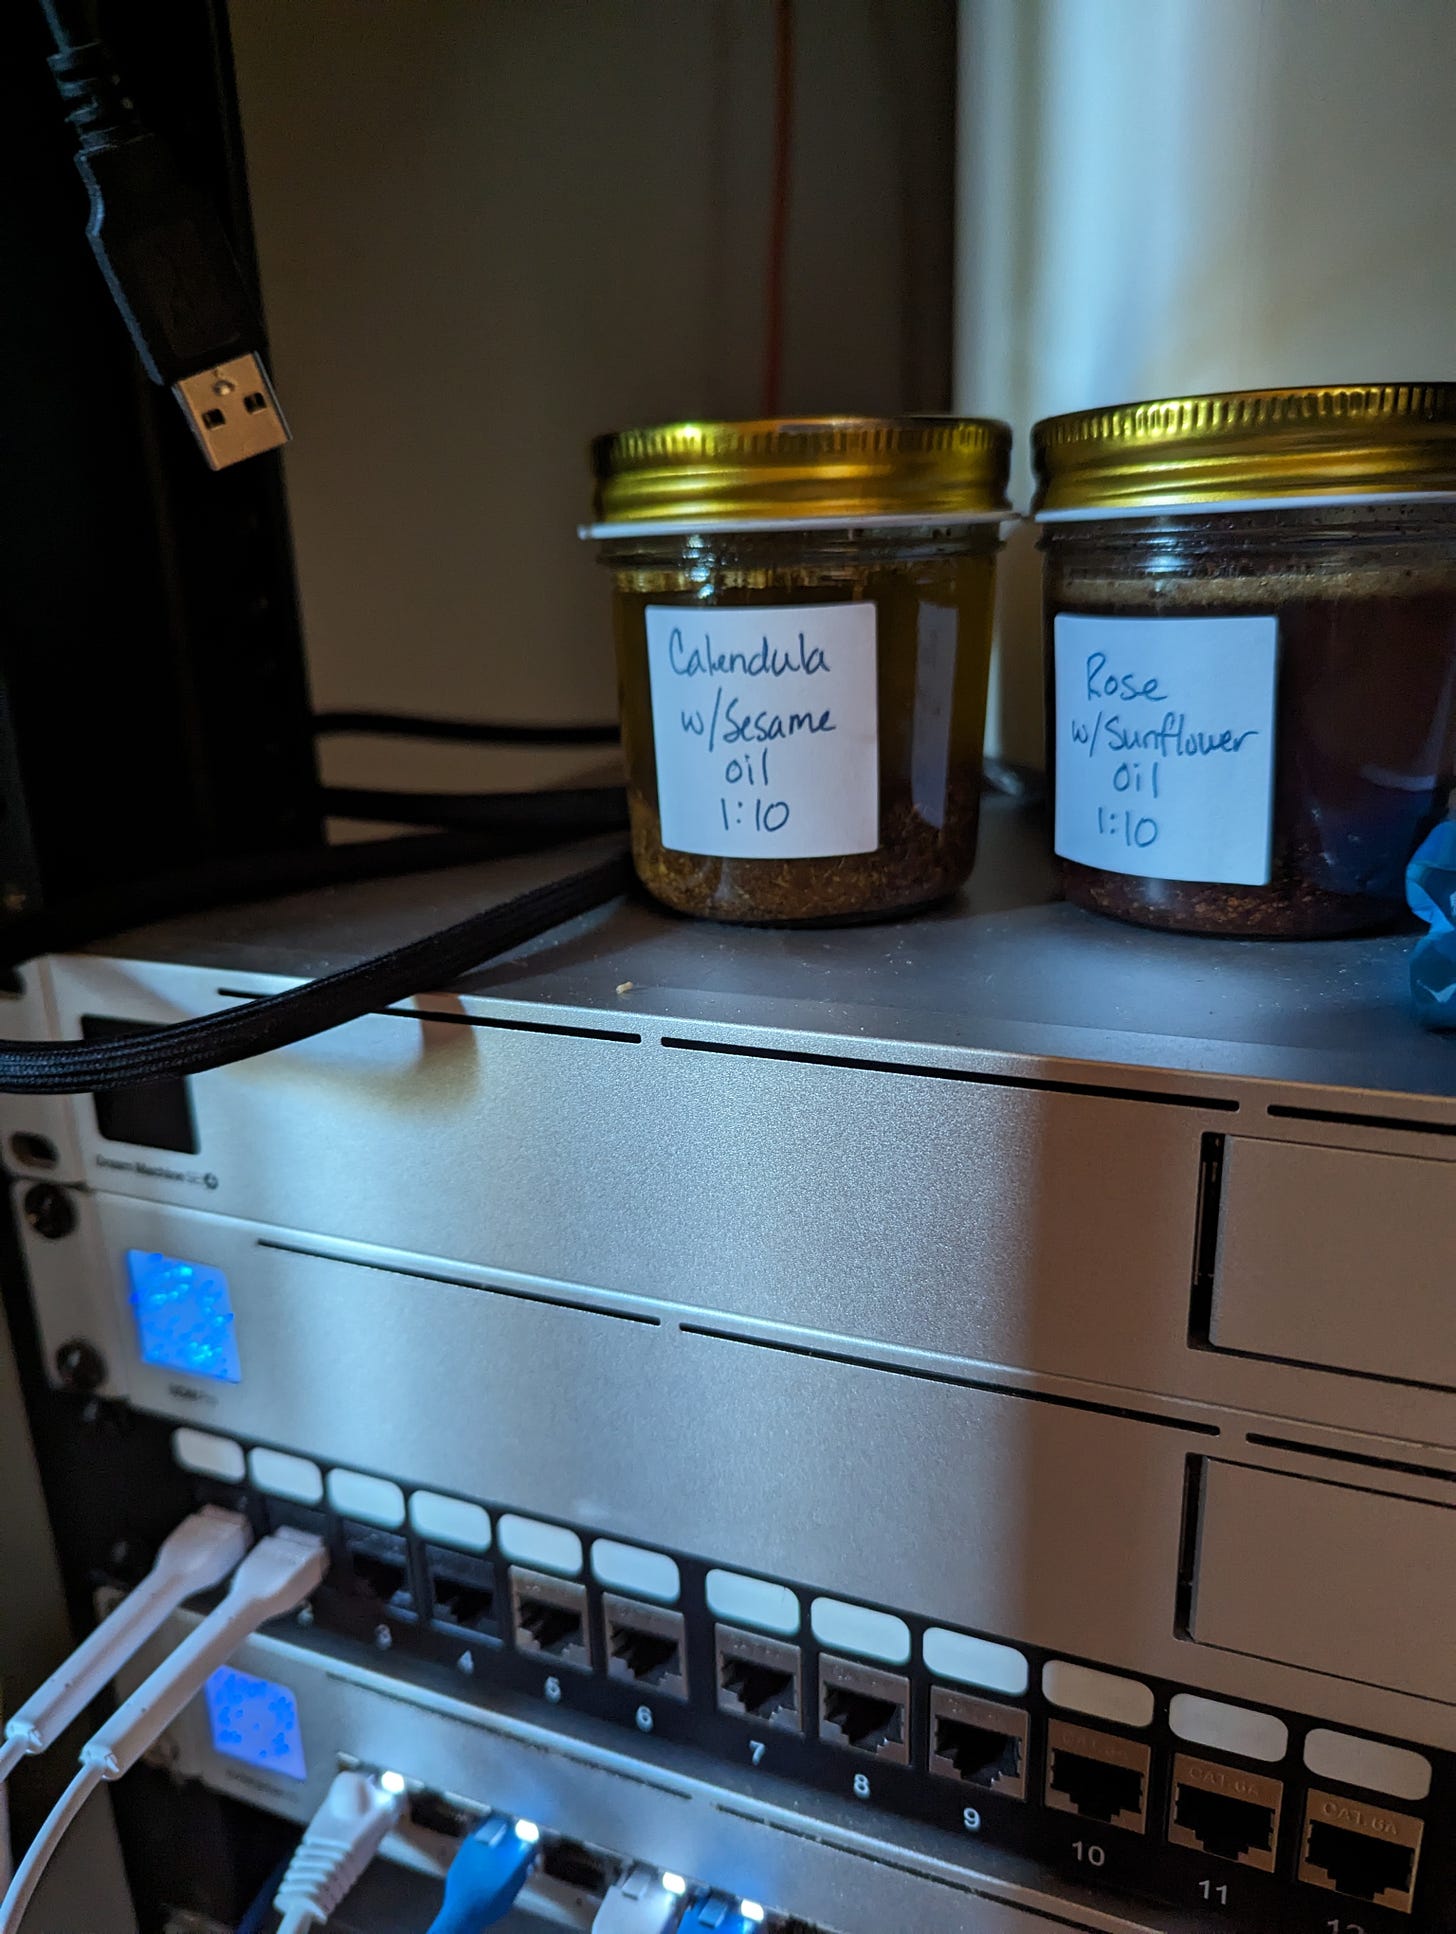 2 jars labeled "calendula withe sesame oil" and "rose with sunflower oil" rest on top of a server components. ethernet cables can be seen in some of the ports and a USB plug hangs down.